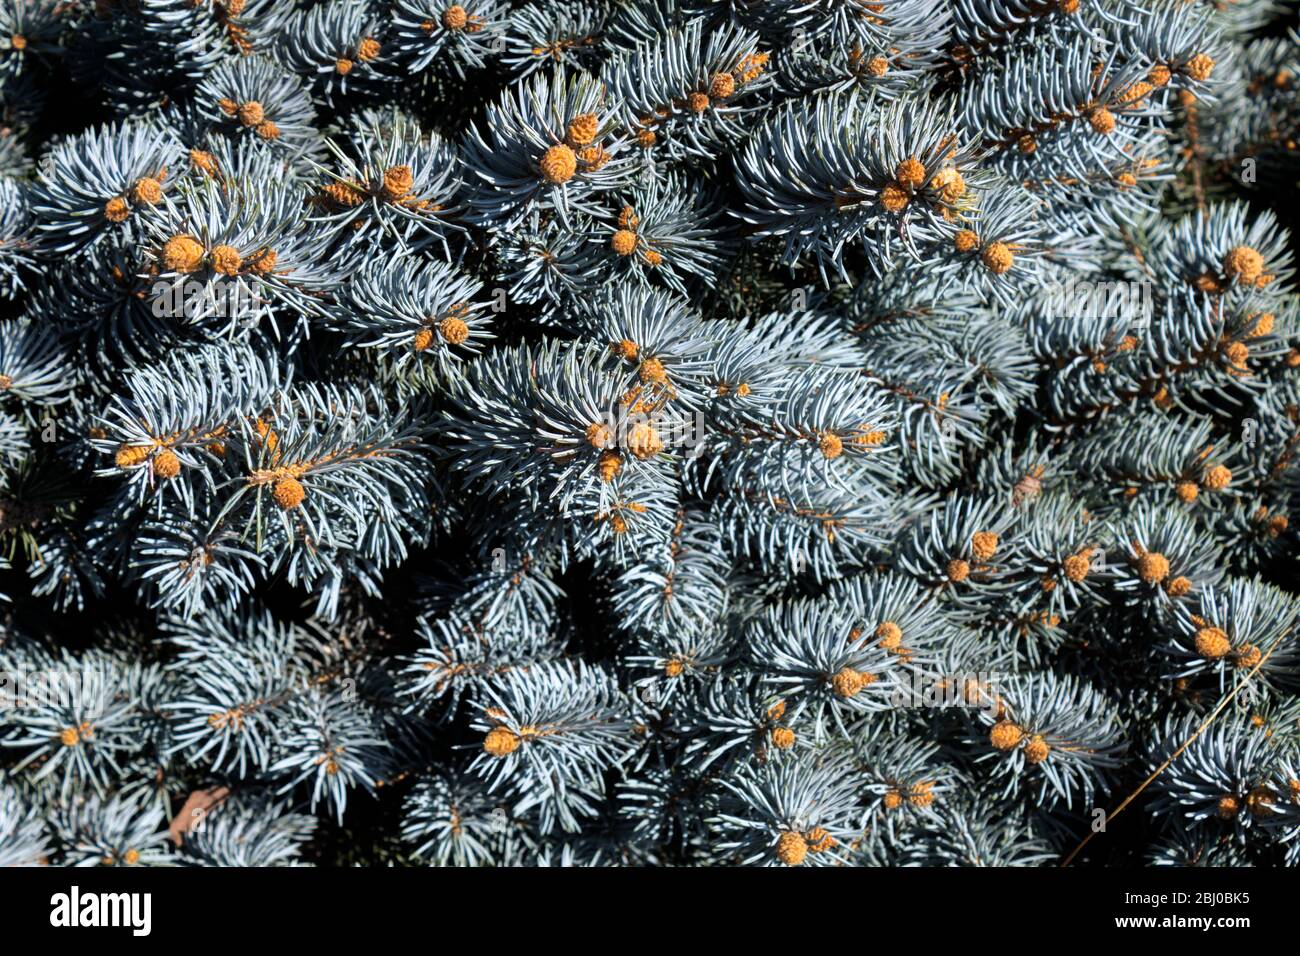 Background image with close up of colorado blue spruce needles and candles. Stock Photo